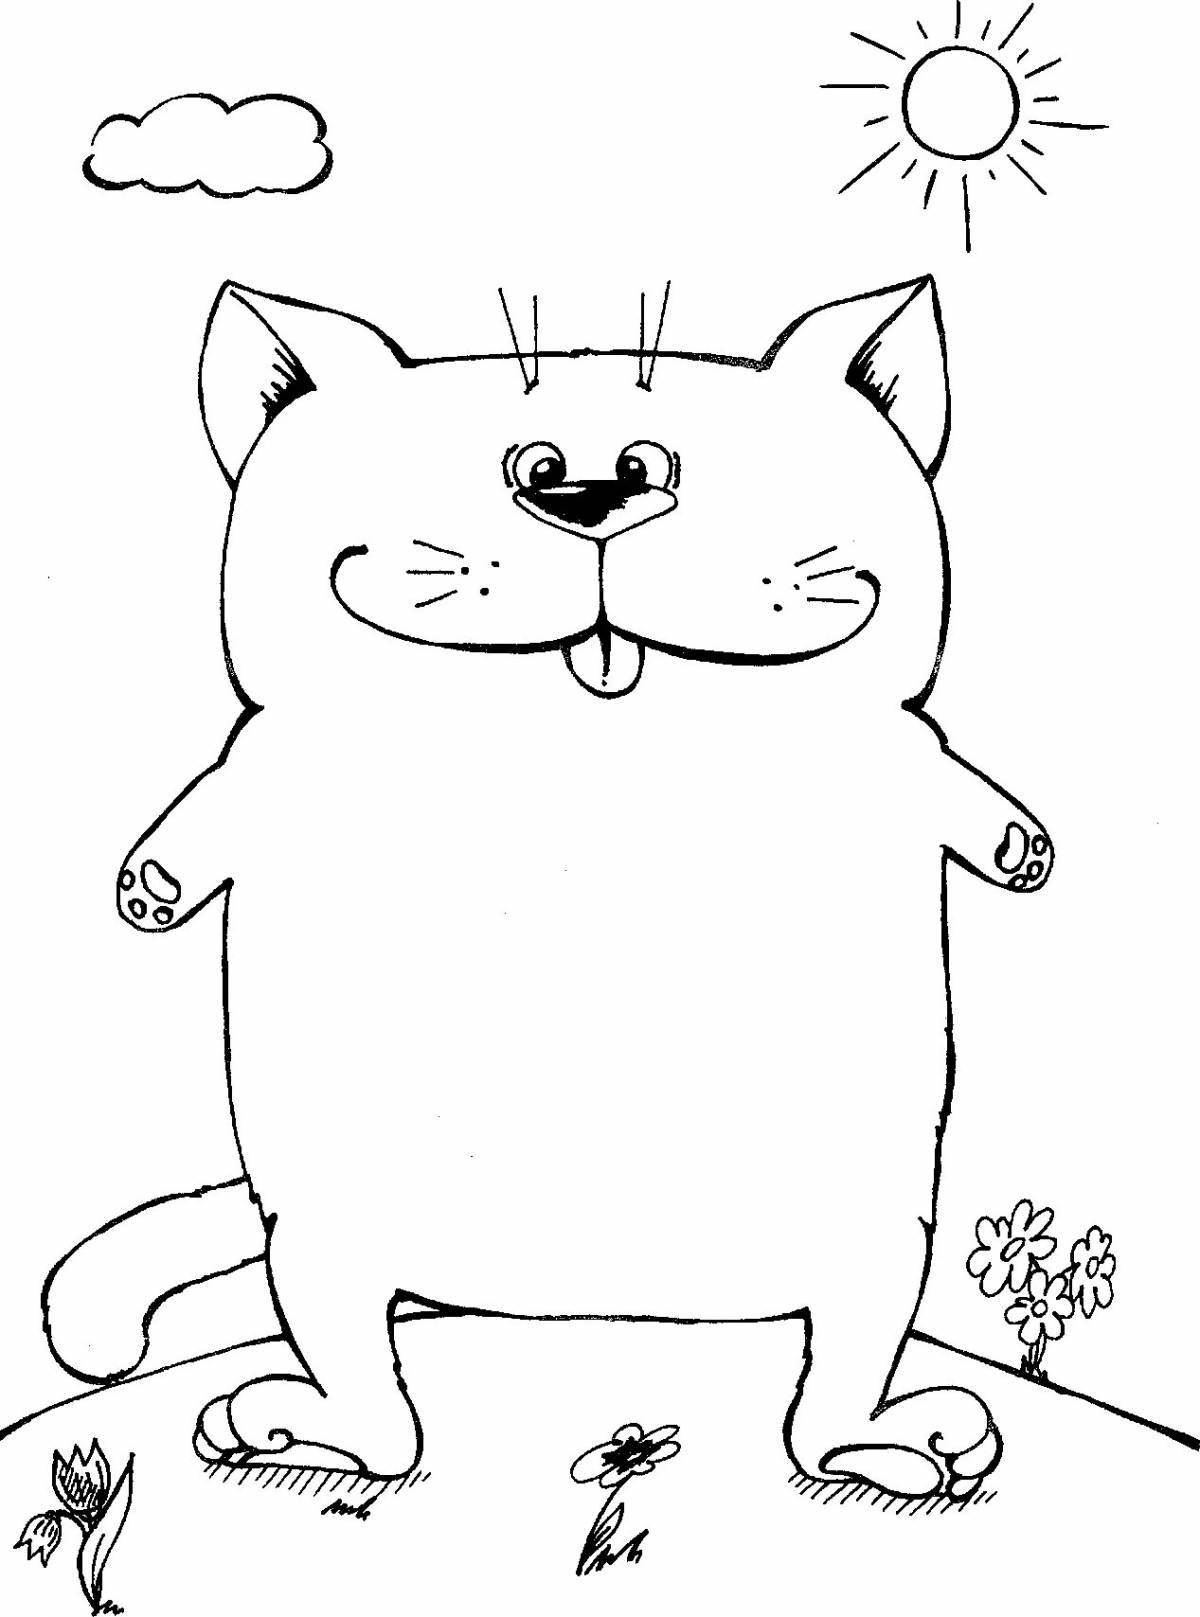 Funny chubby cat coloring book